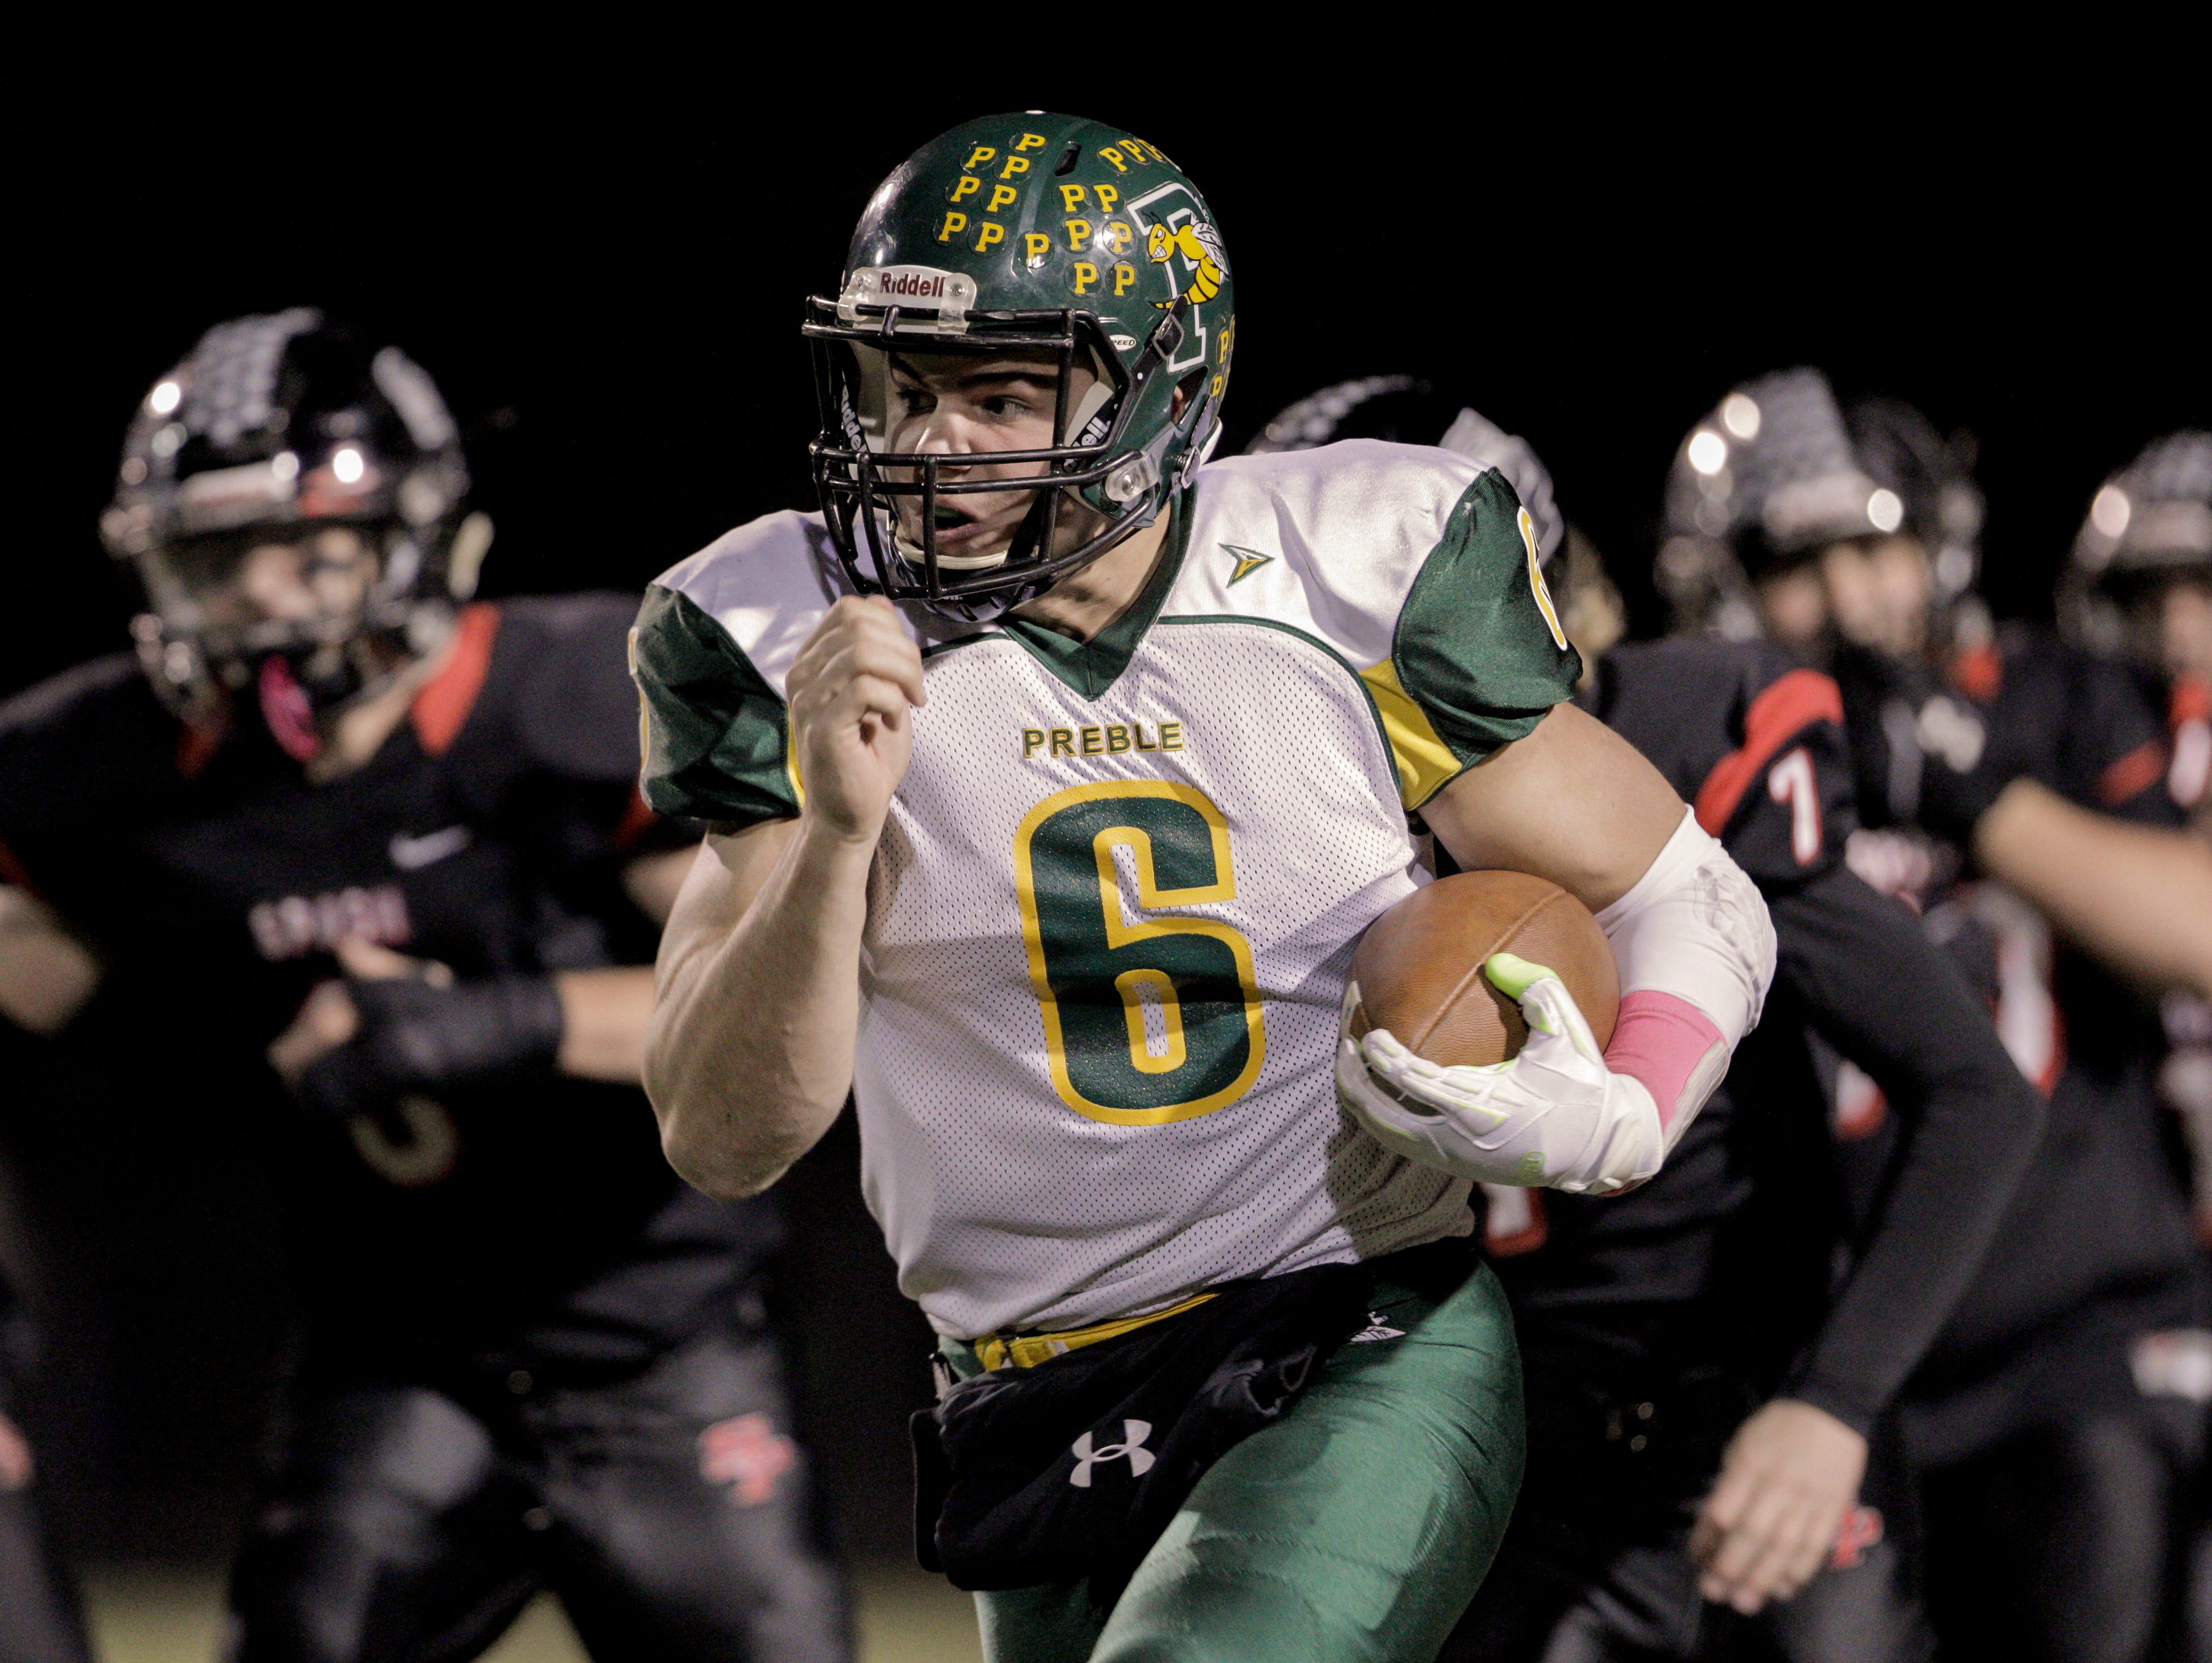 Green Bay Preble senior Coy Wanner announced Saturday he has verbally committed to accept a preferred walk-on offer from the University of Wisconsin football team.